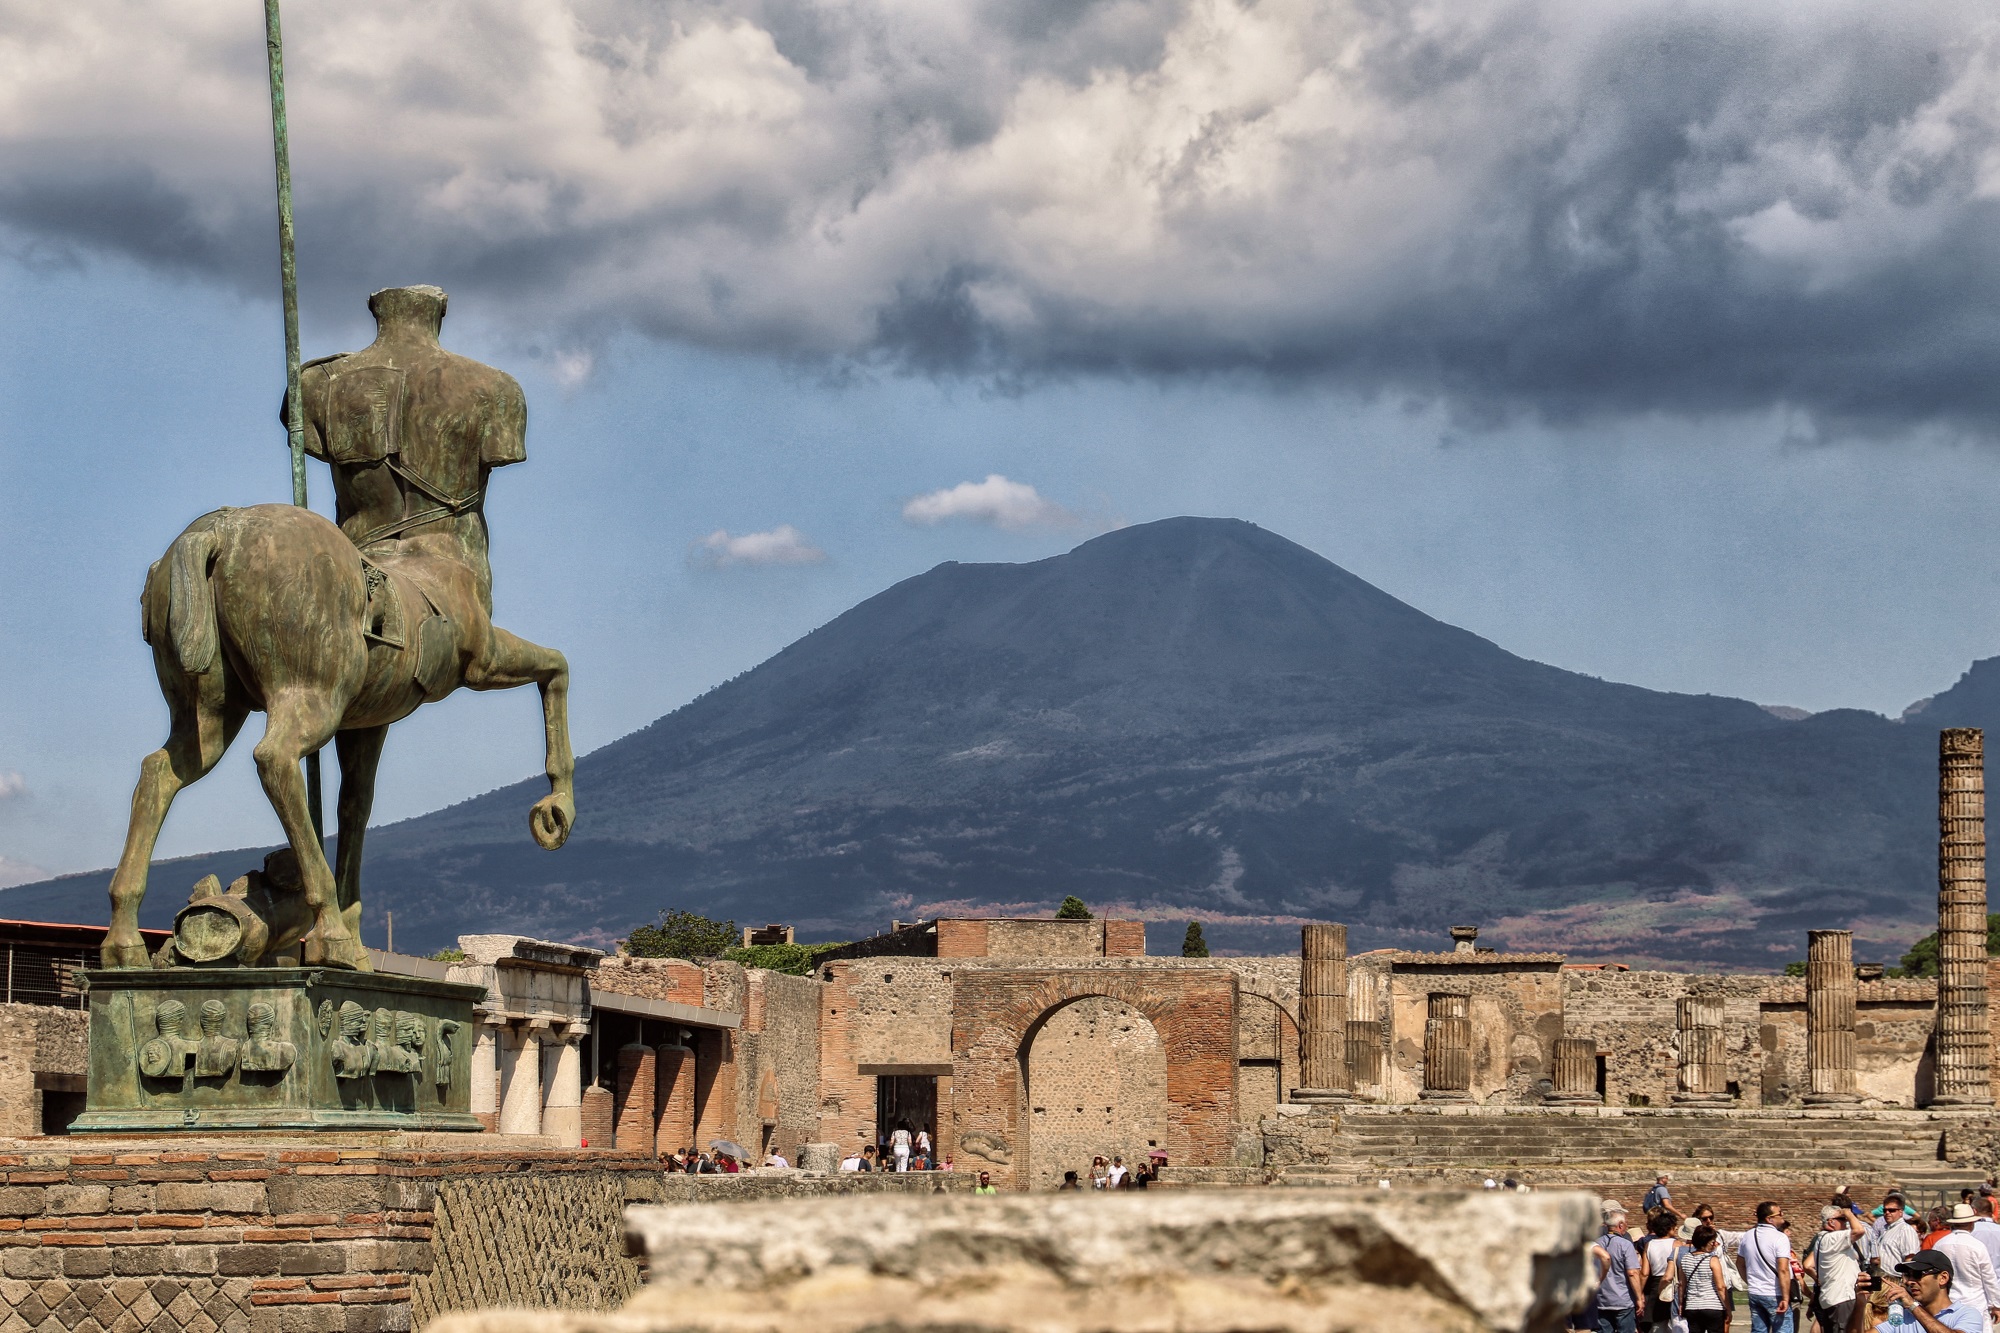 The Best Sights to See in Pompeii